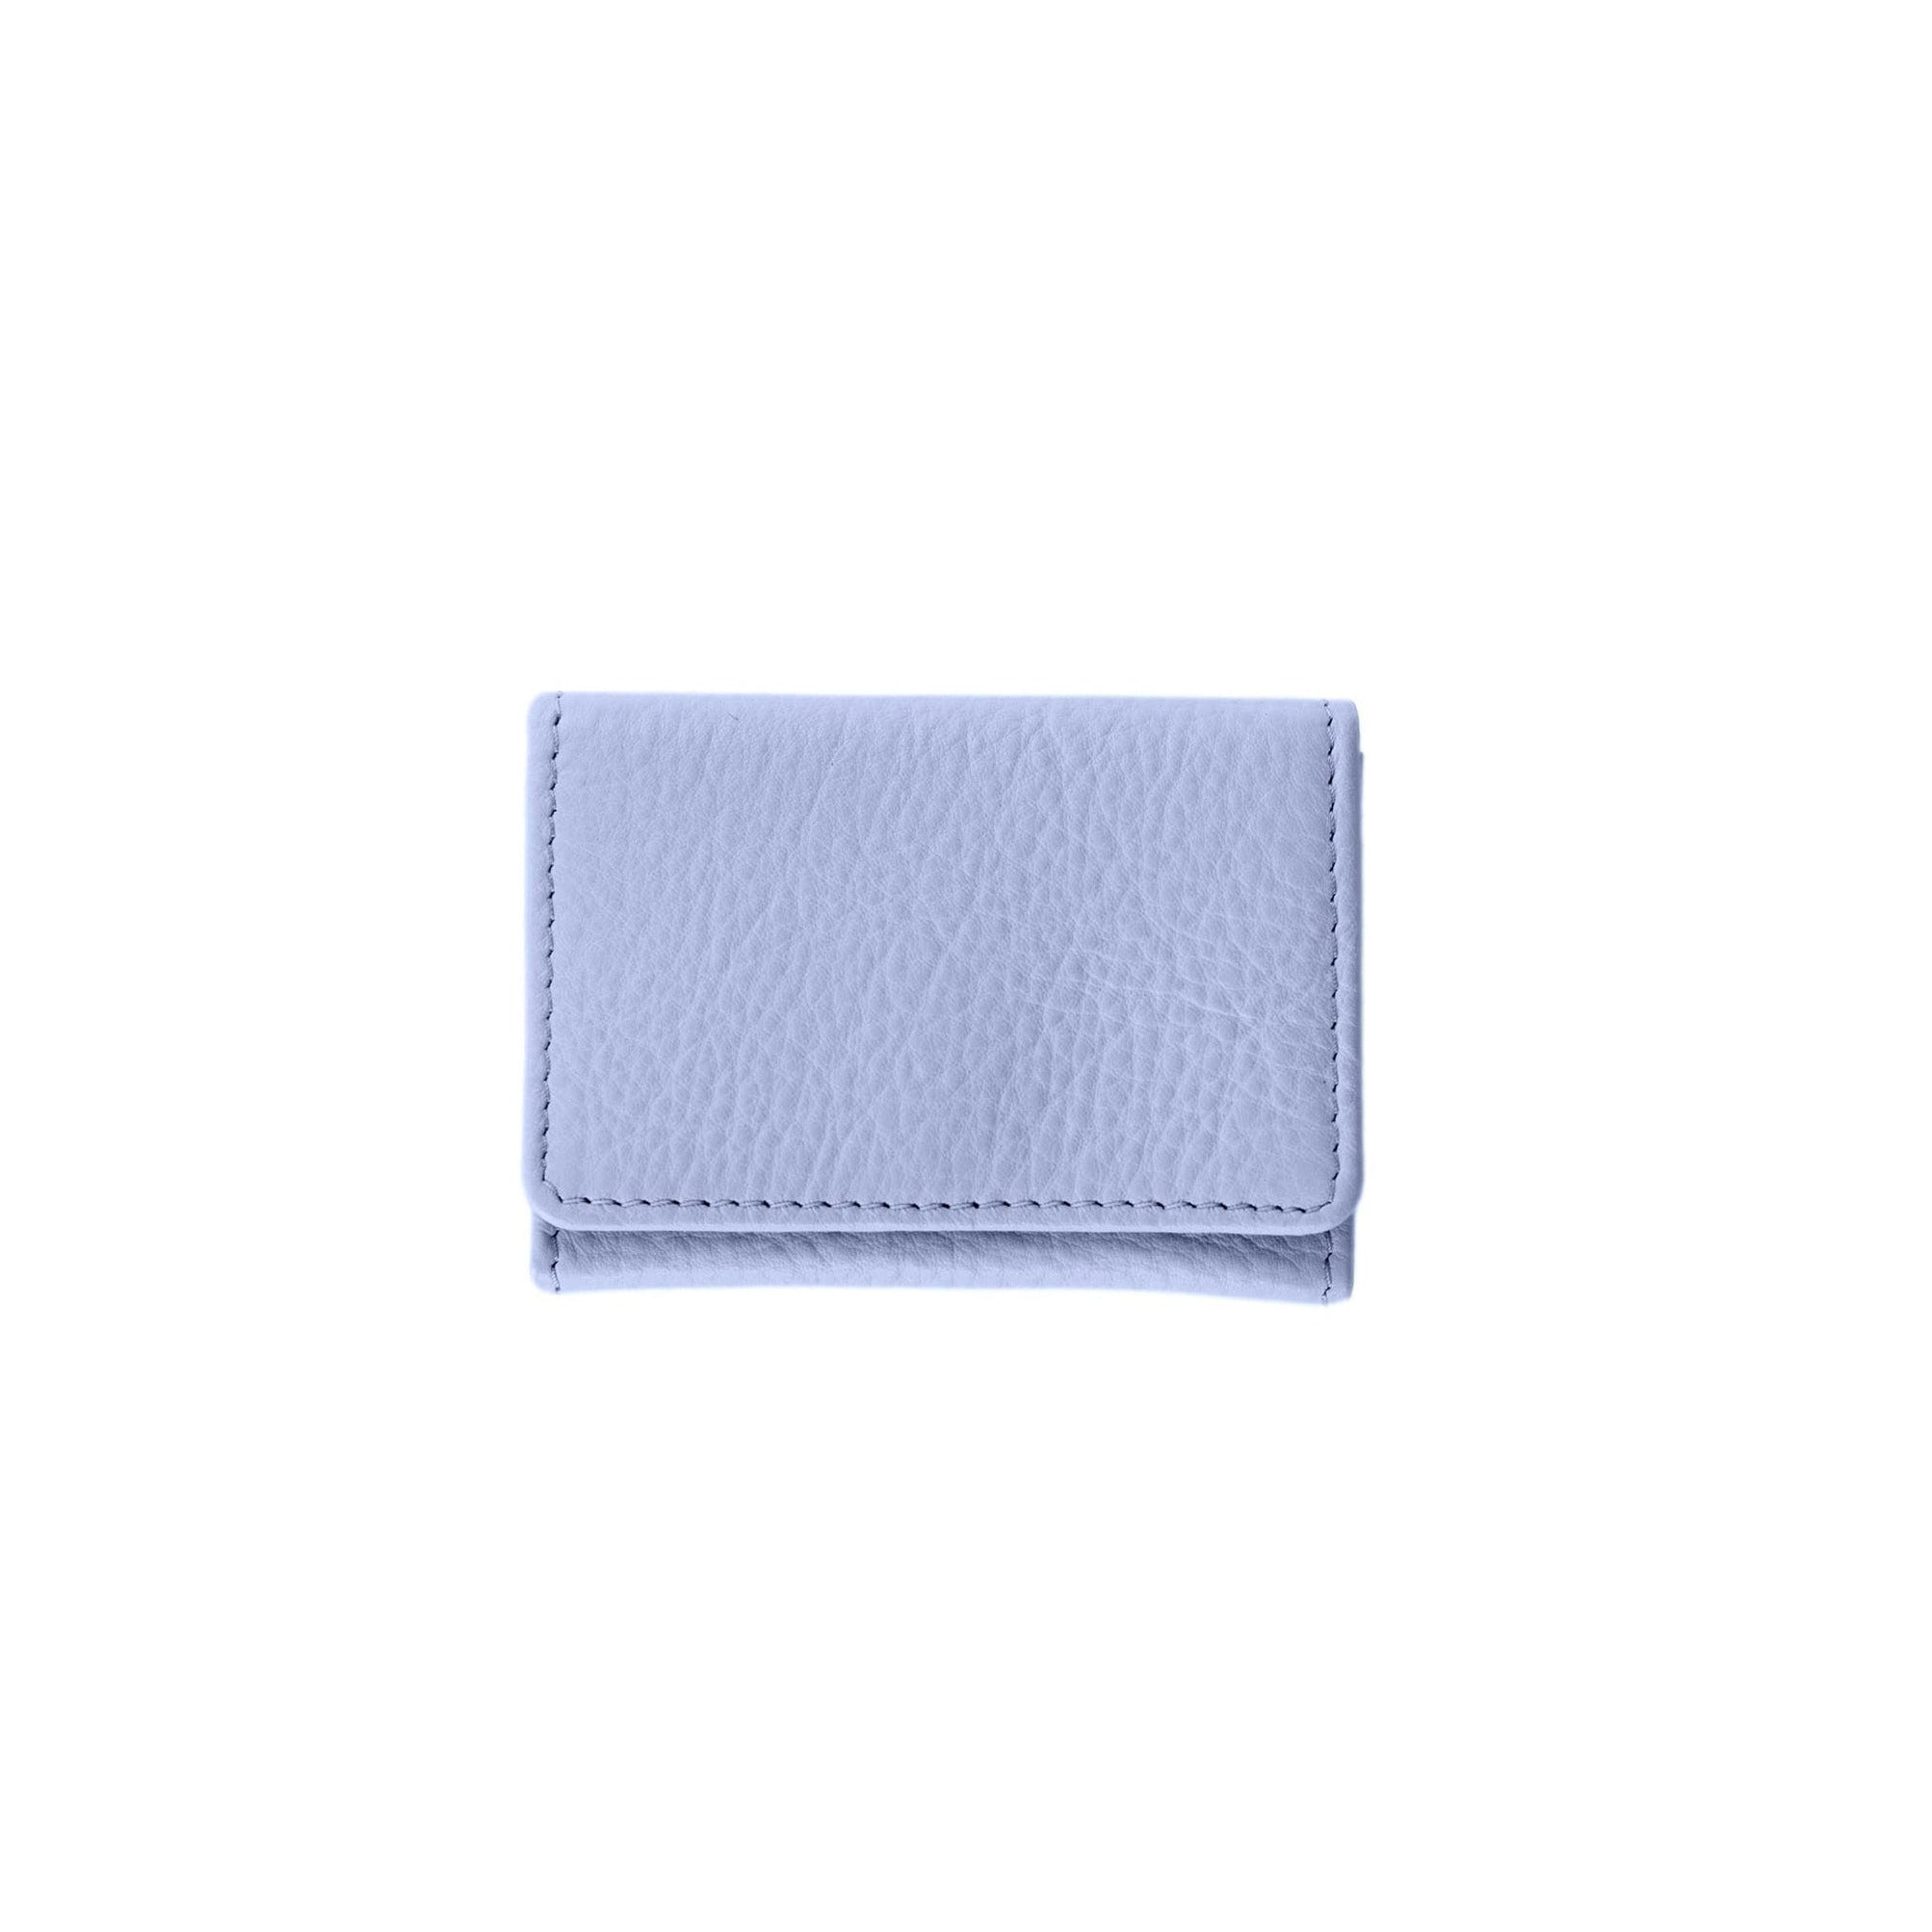 Fisher Card Holder - Silver Lilac Matte Oil Leather | Sapahn.